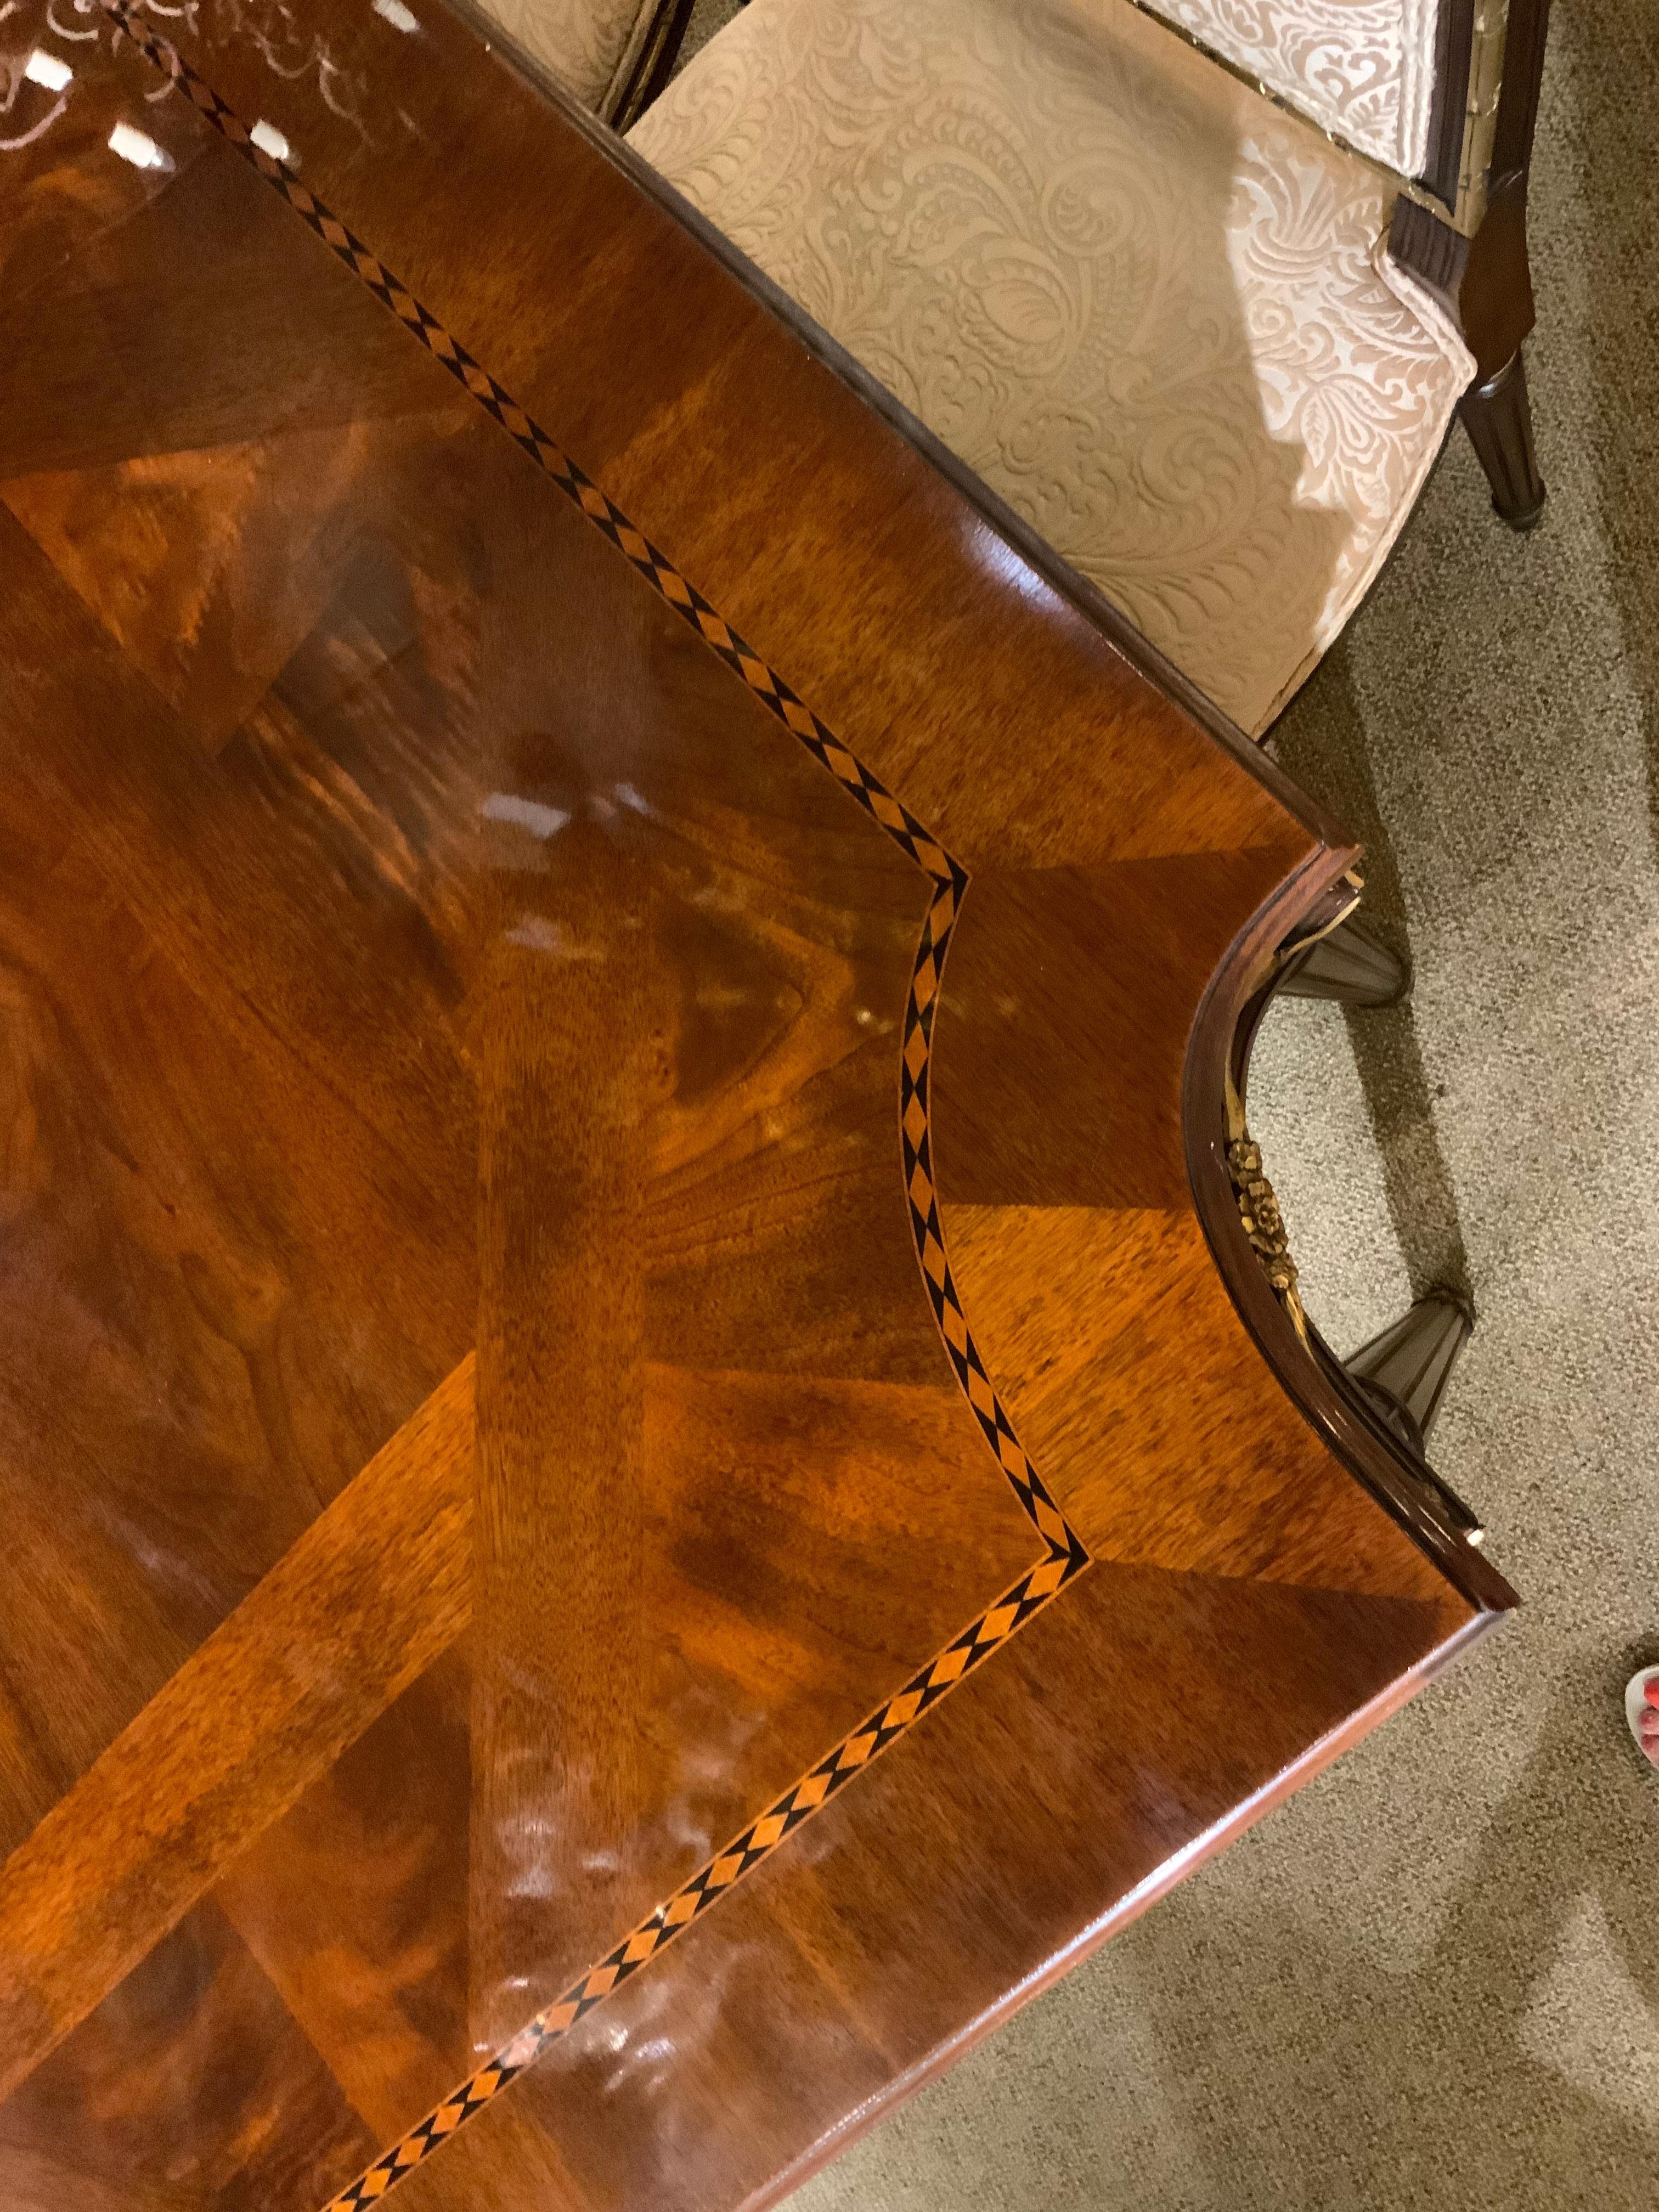 20th Century Louis XVI-Style Mahogany Dining Table with 12 Chairs, Marquetry Inlay Gilt Trim